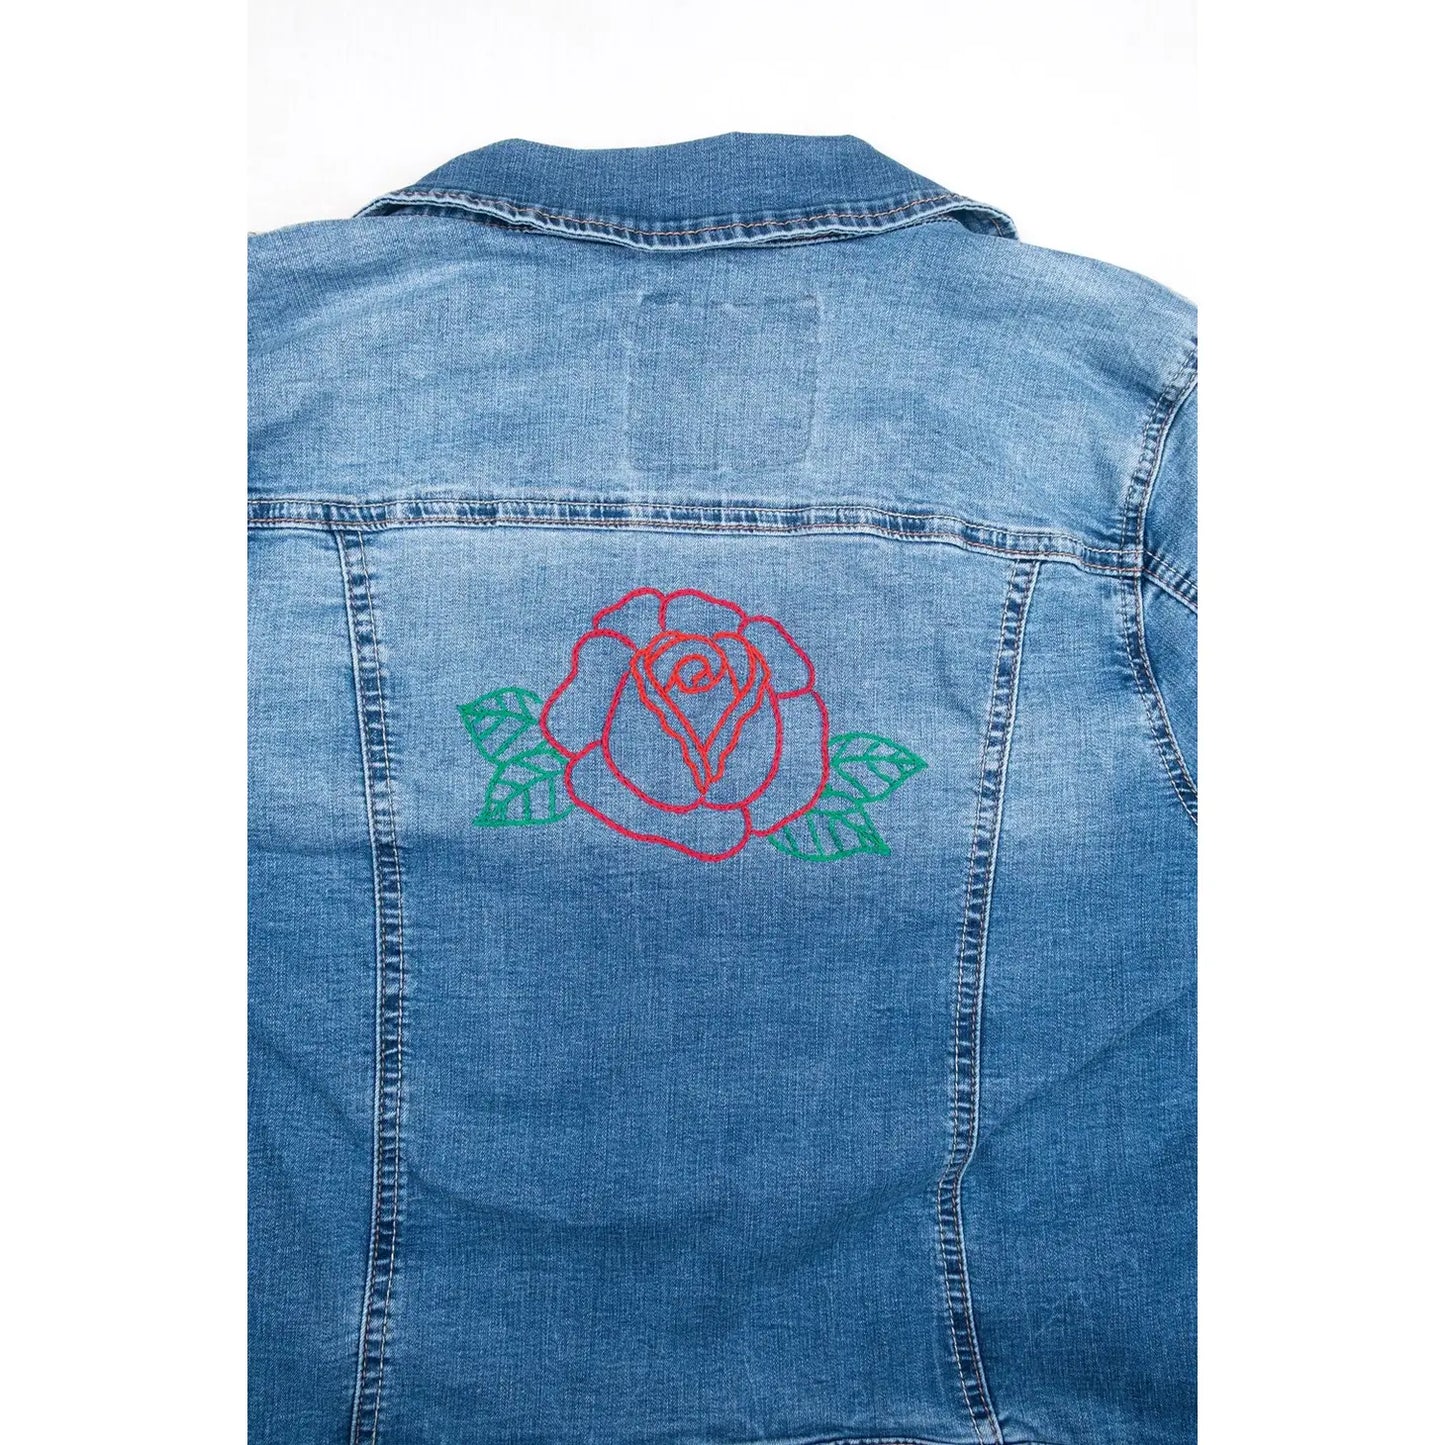 Everyday Embroidery for Modern Stitchers: 50 Iron-On Designs